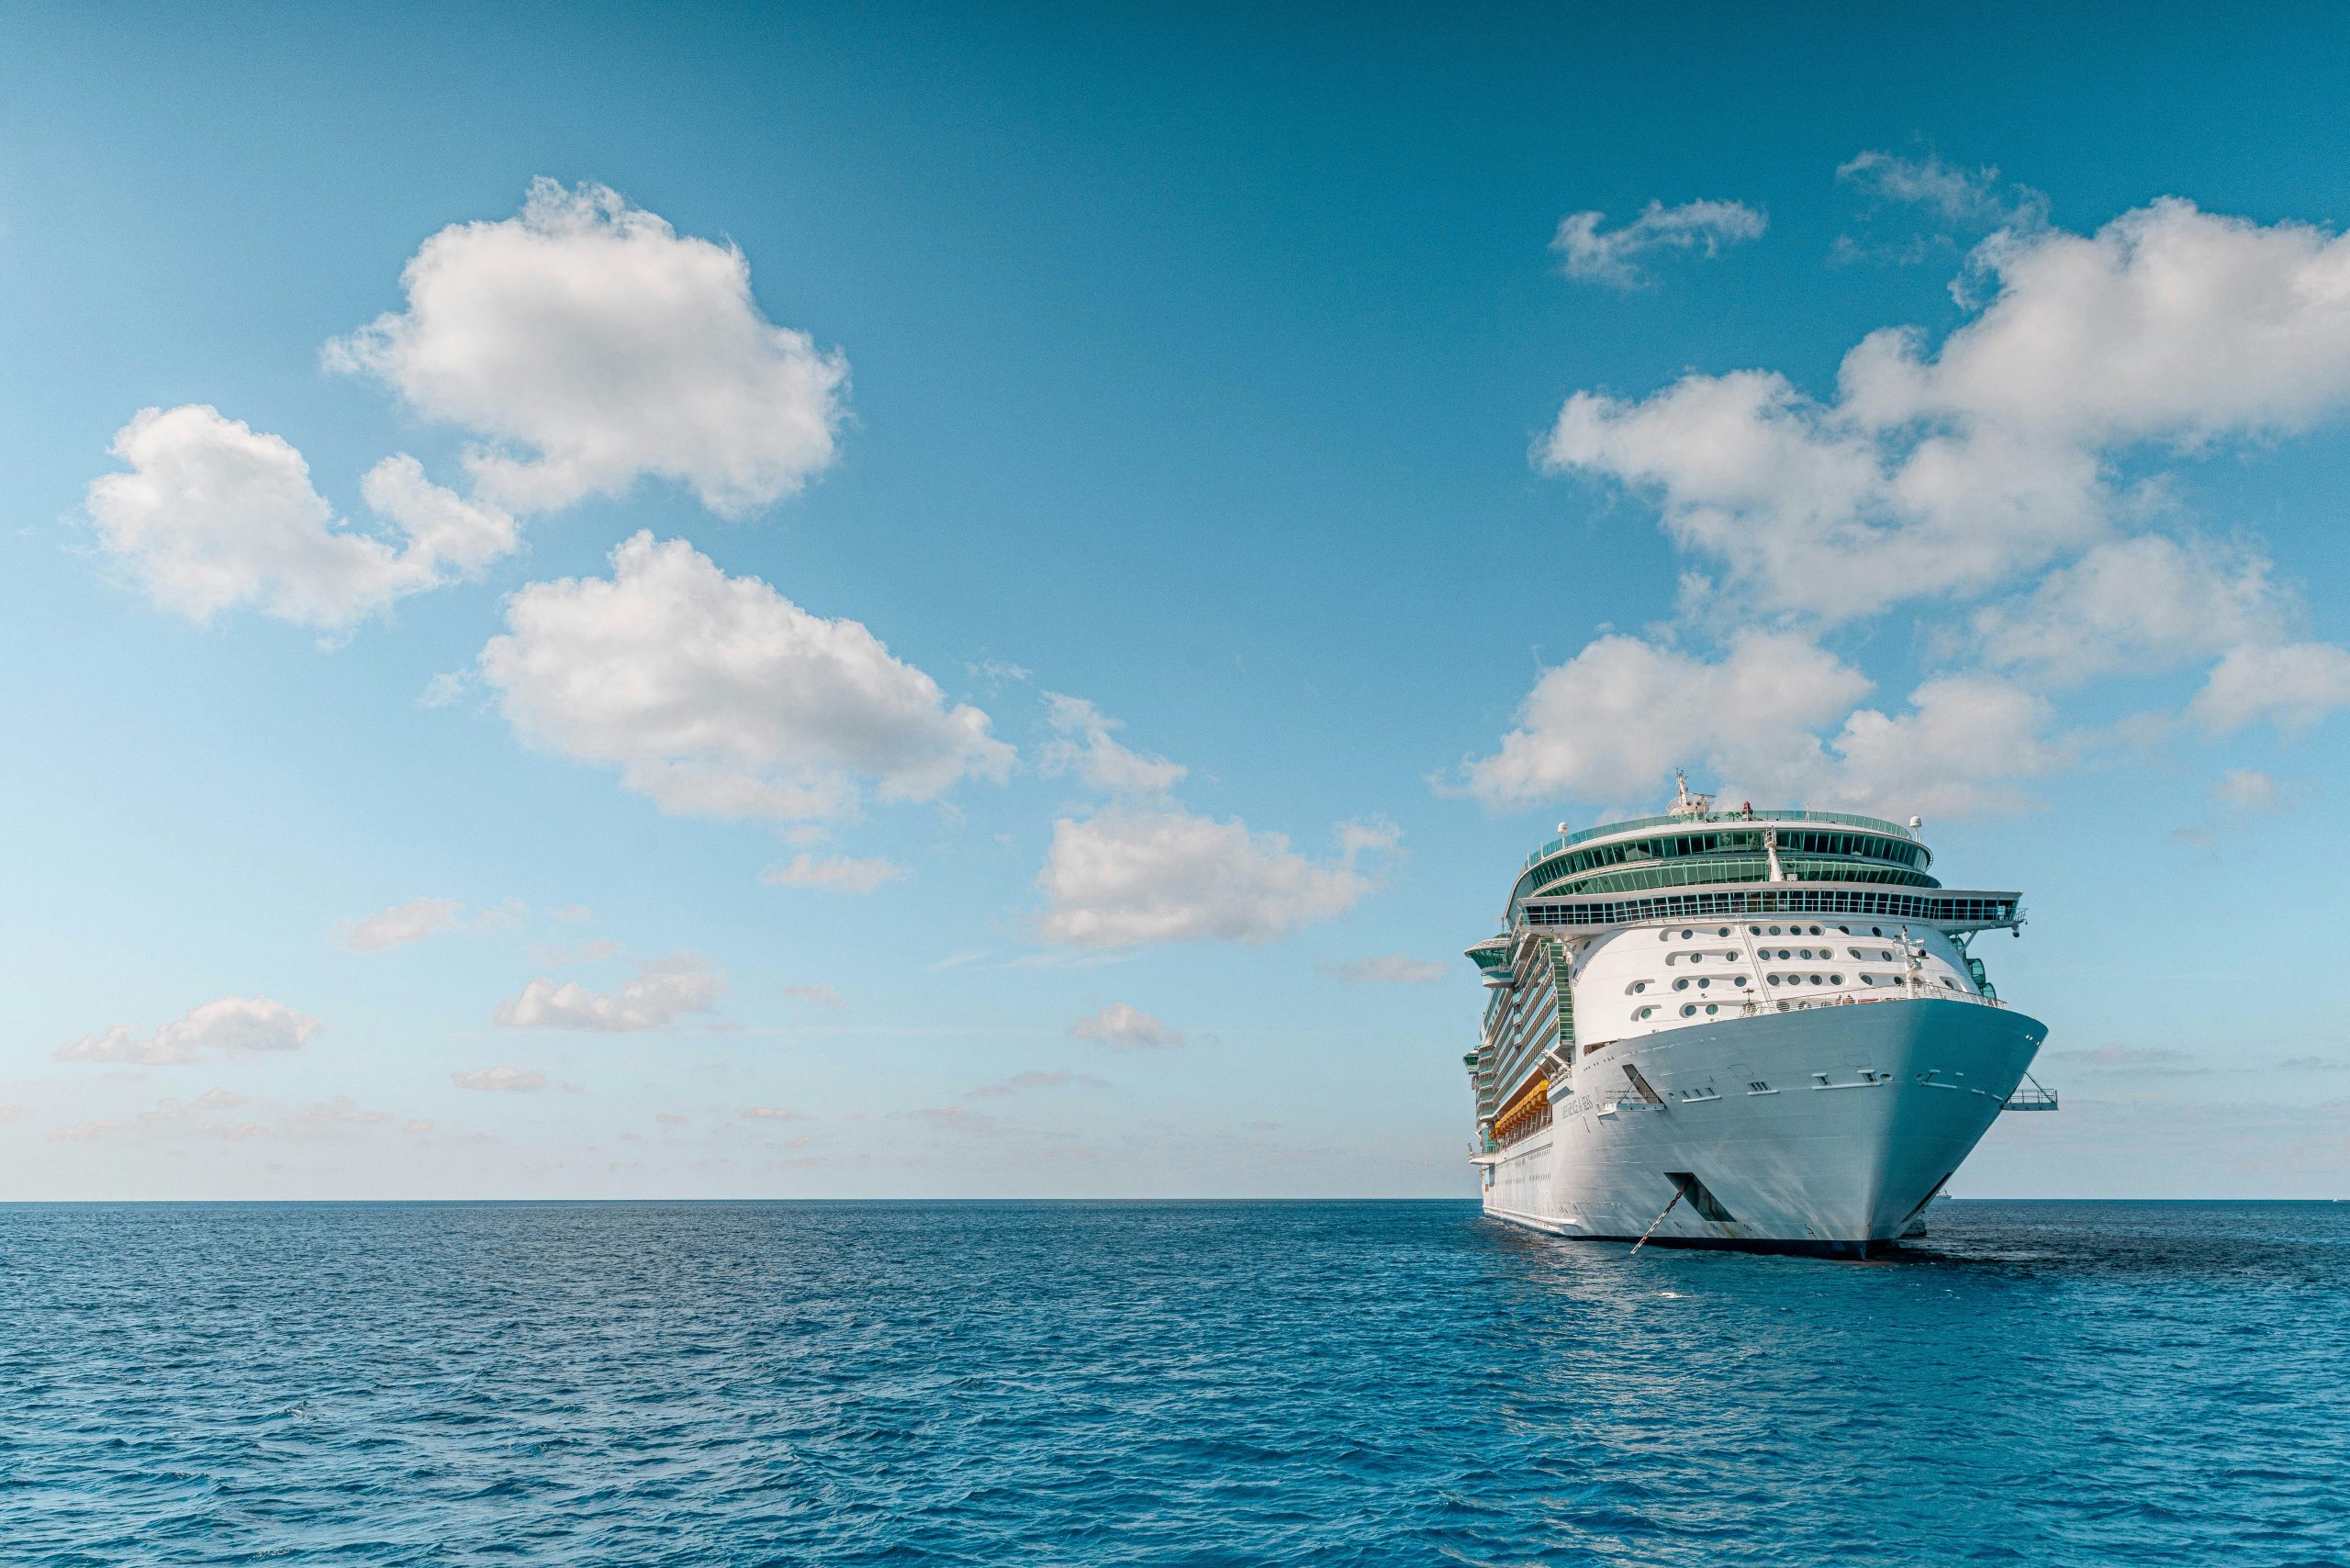 plan your dream cruise vacation and explore the world's best destinations with our exclusive cruise packages. book now for an unforgettable experience!